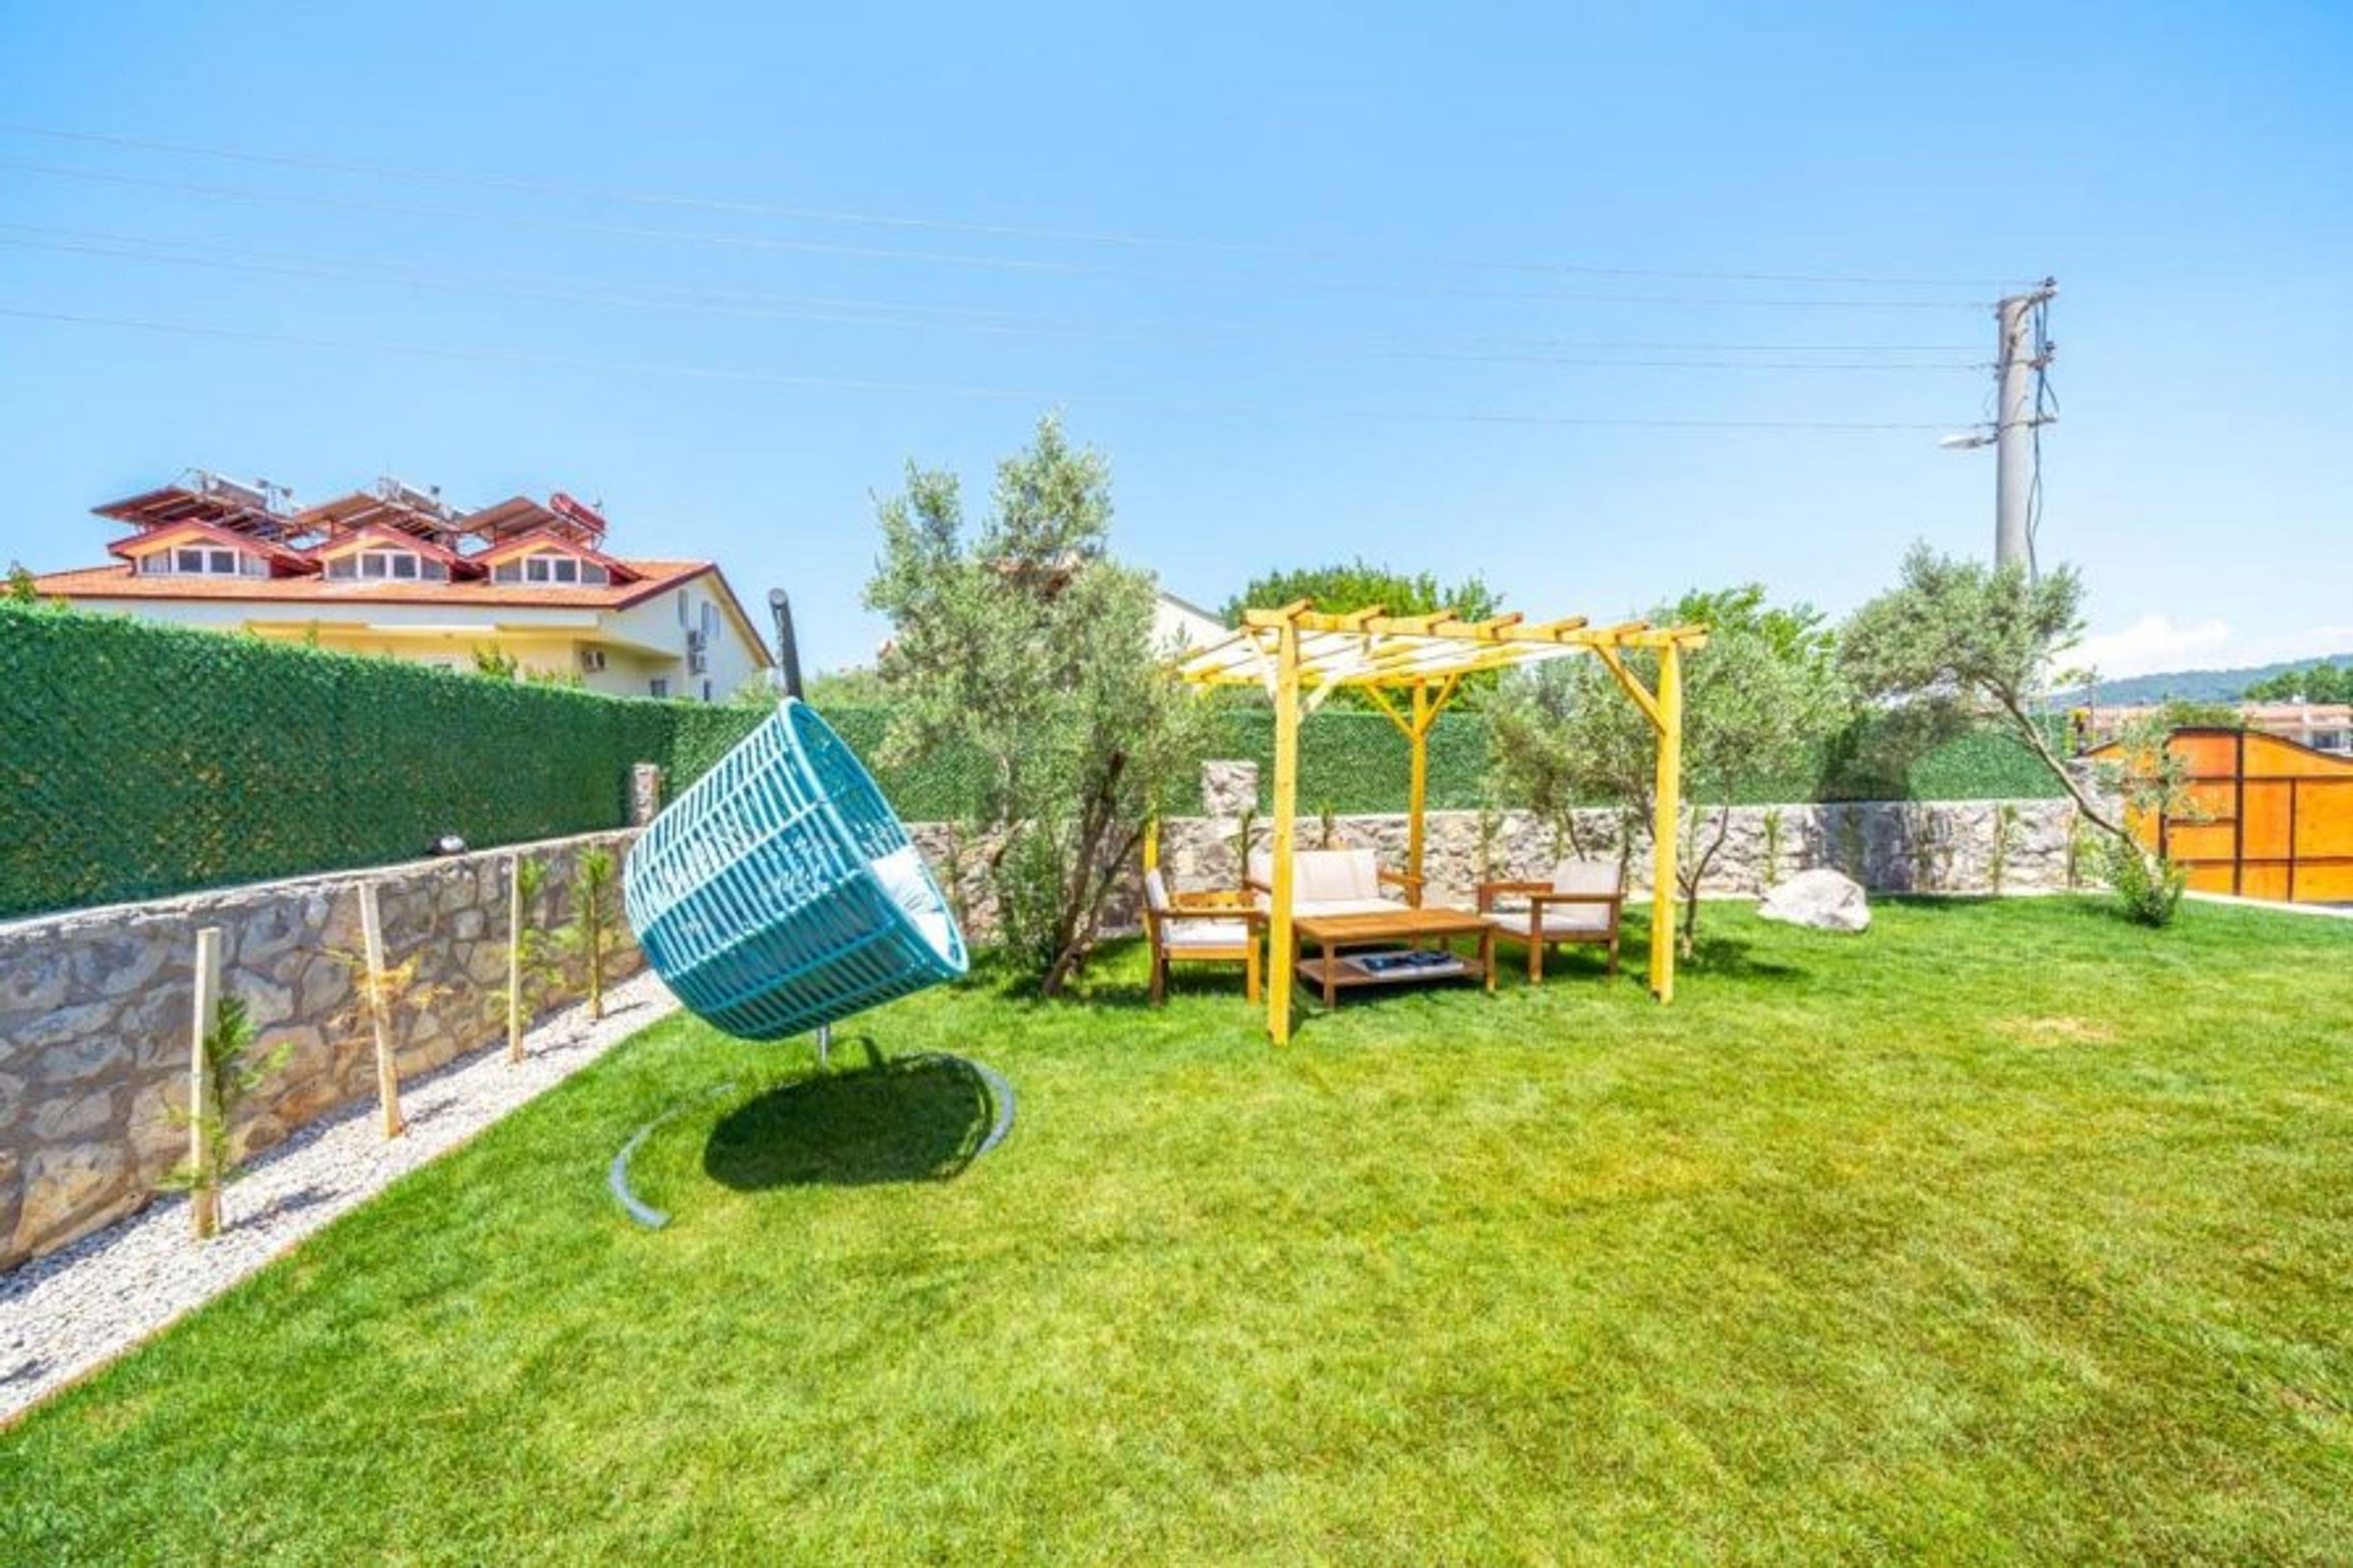 Garden Swing and Patio with Sofa